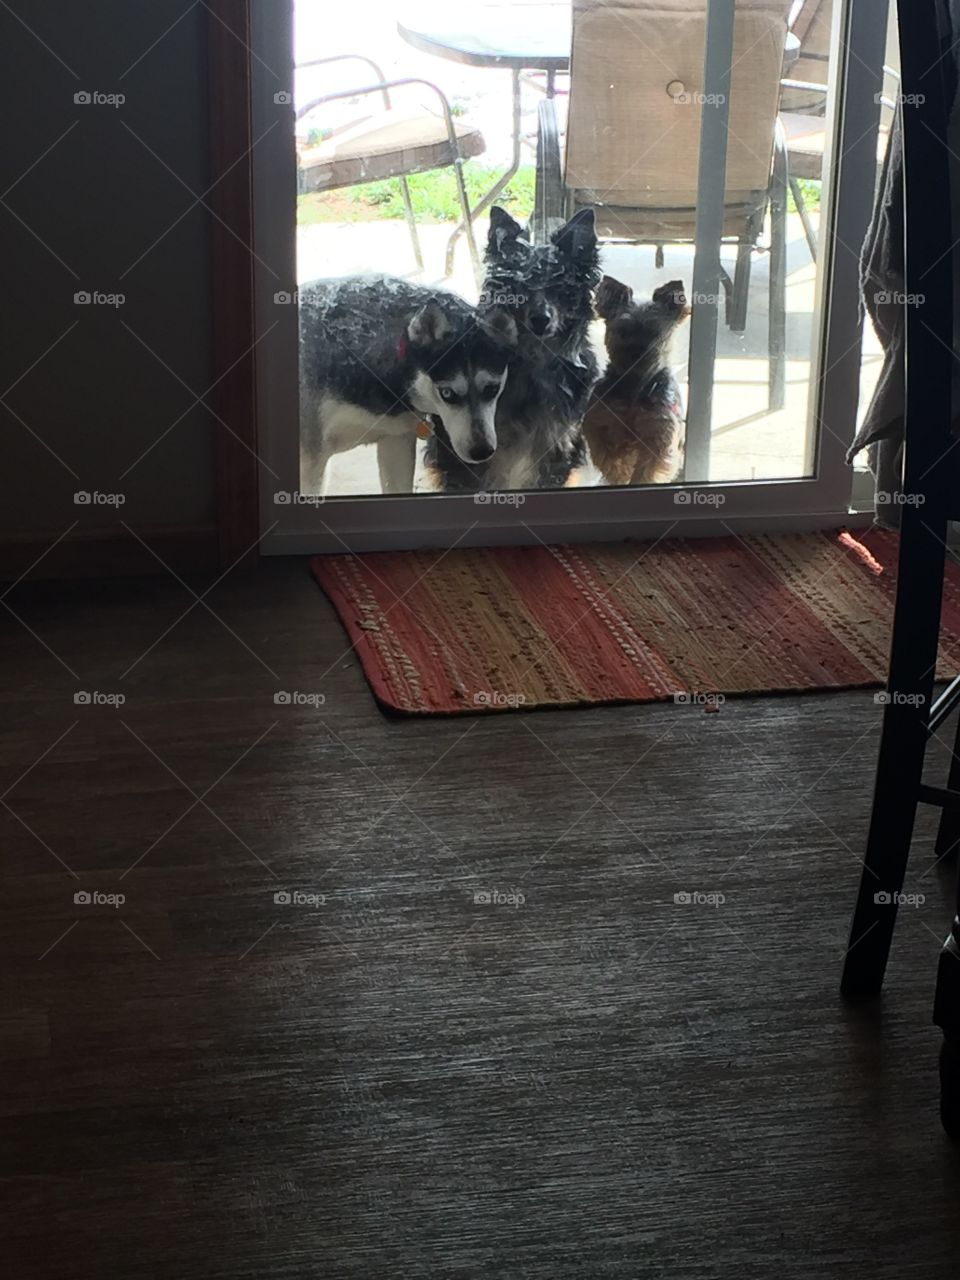 Dogs waiting to come in